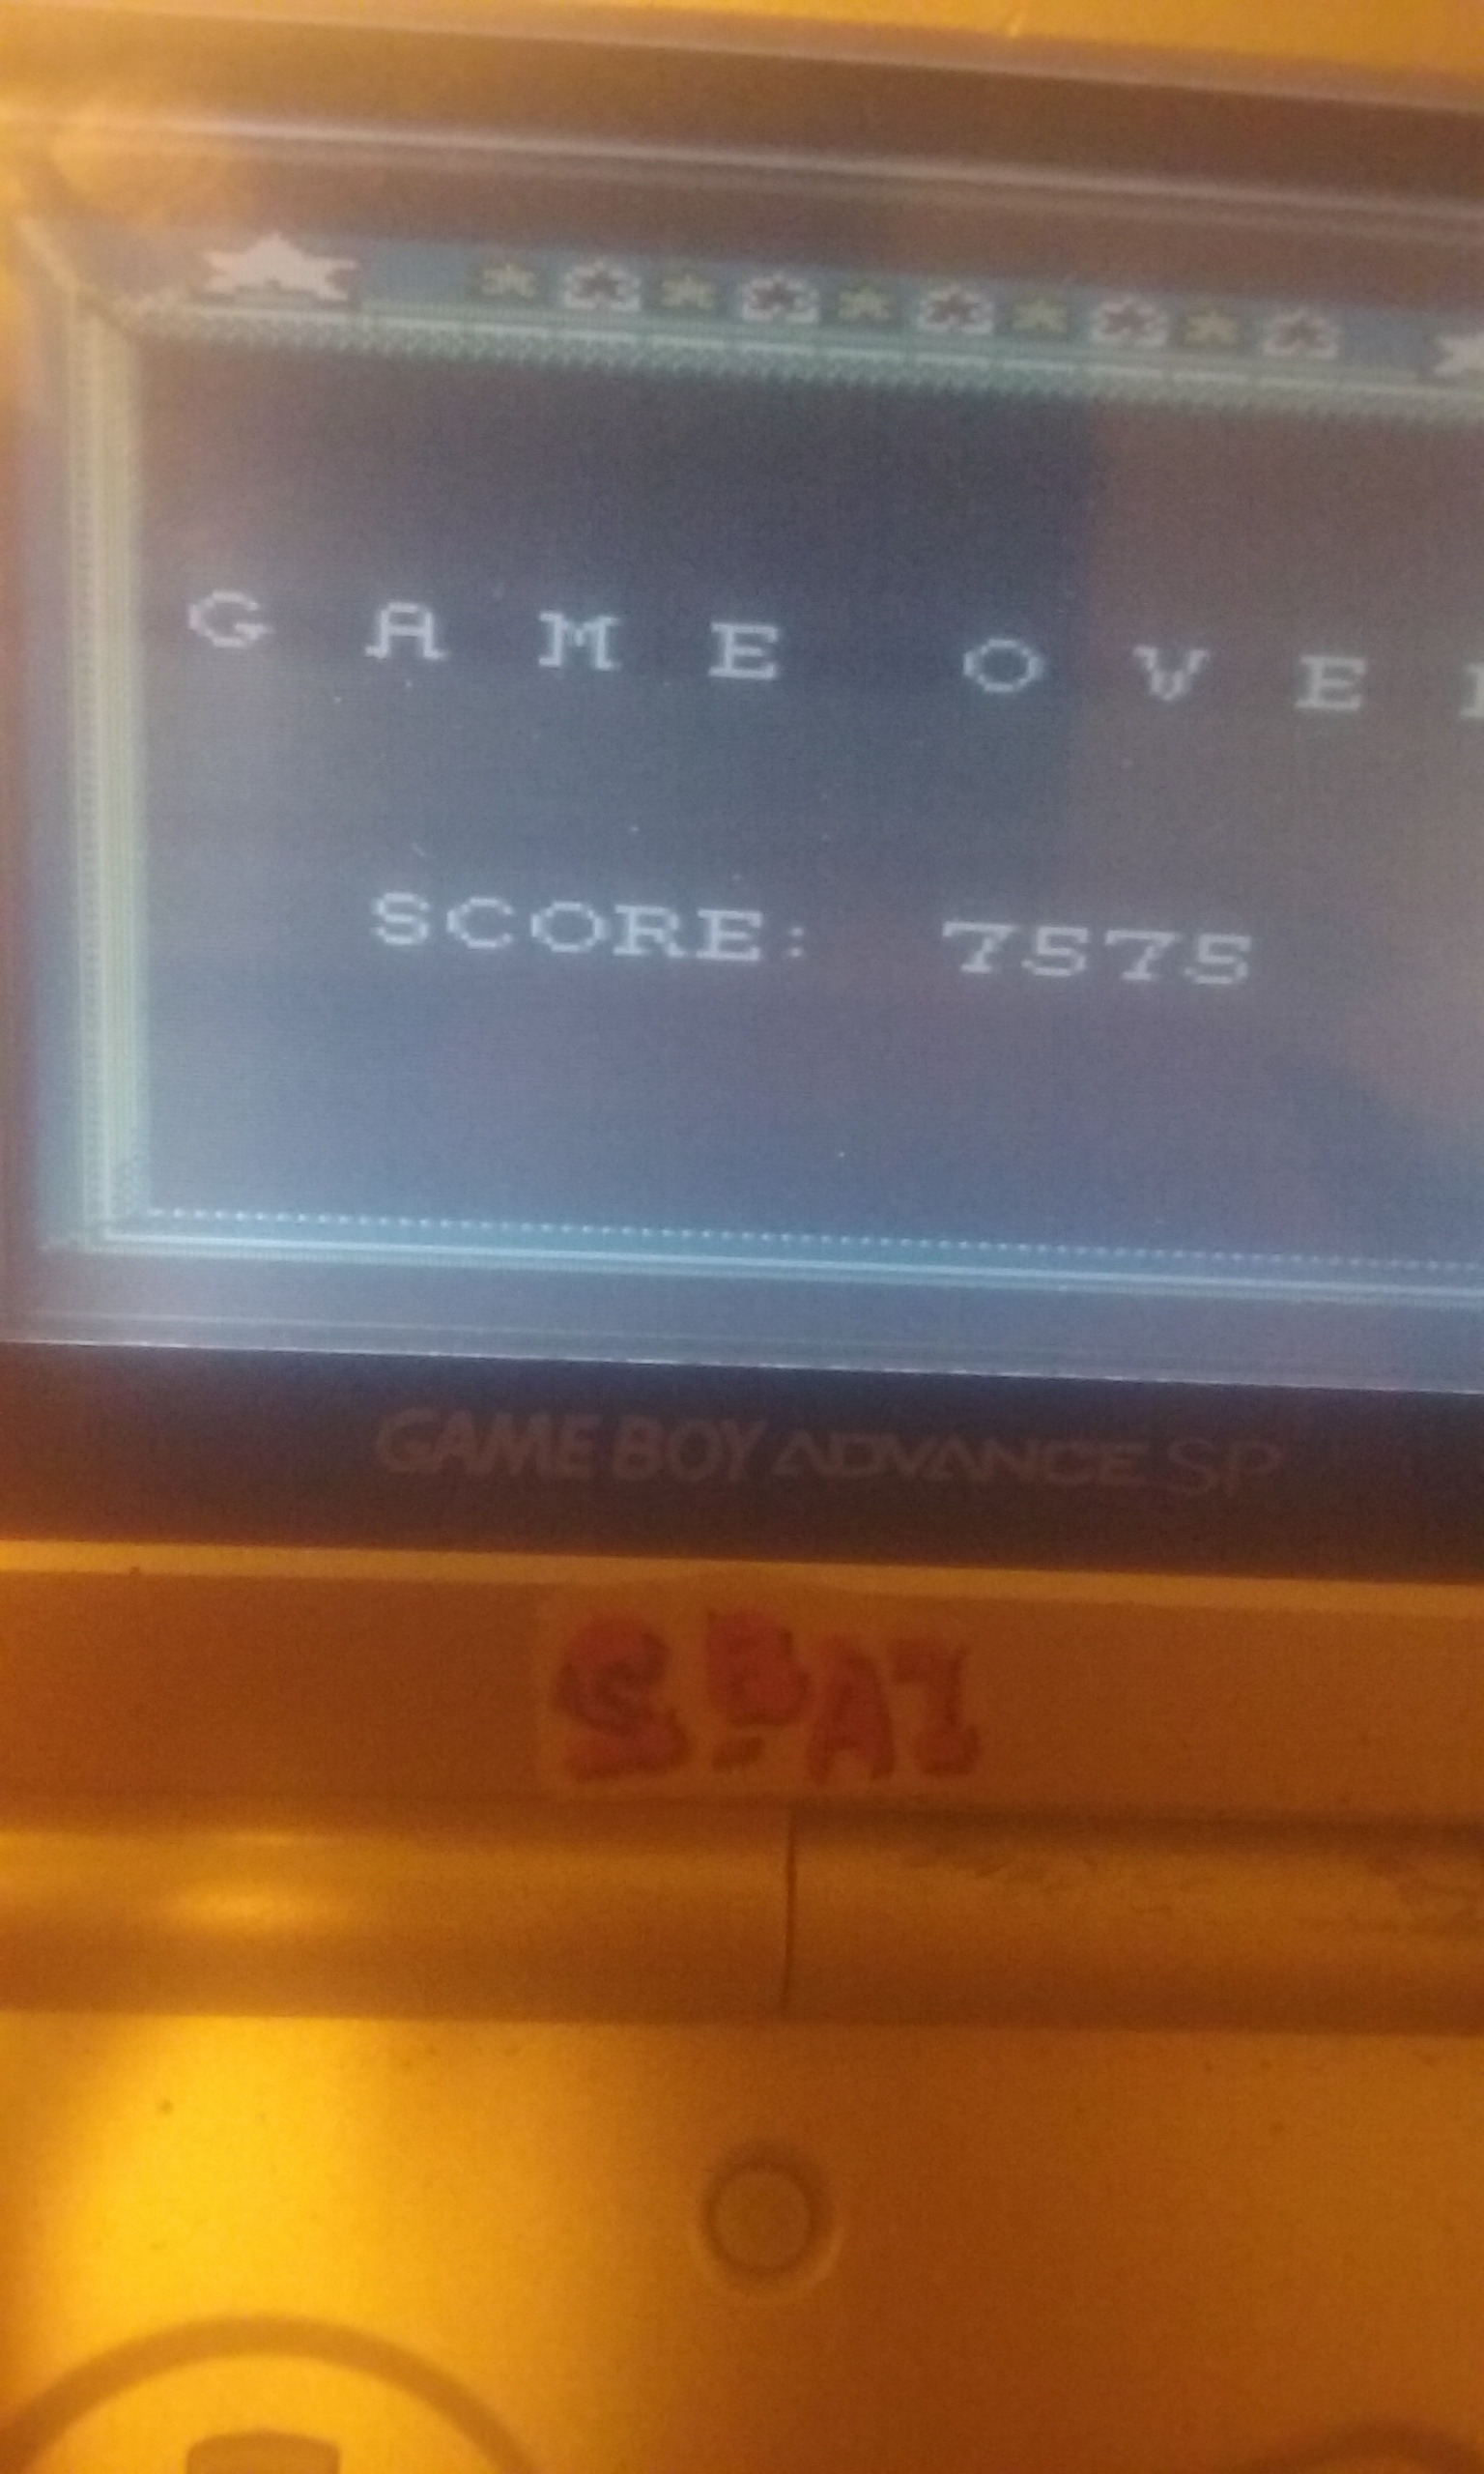 S.BAZ: Captain America and The Avengers (Game Boy) 7,575 points on 2021-02-27 13:48:34